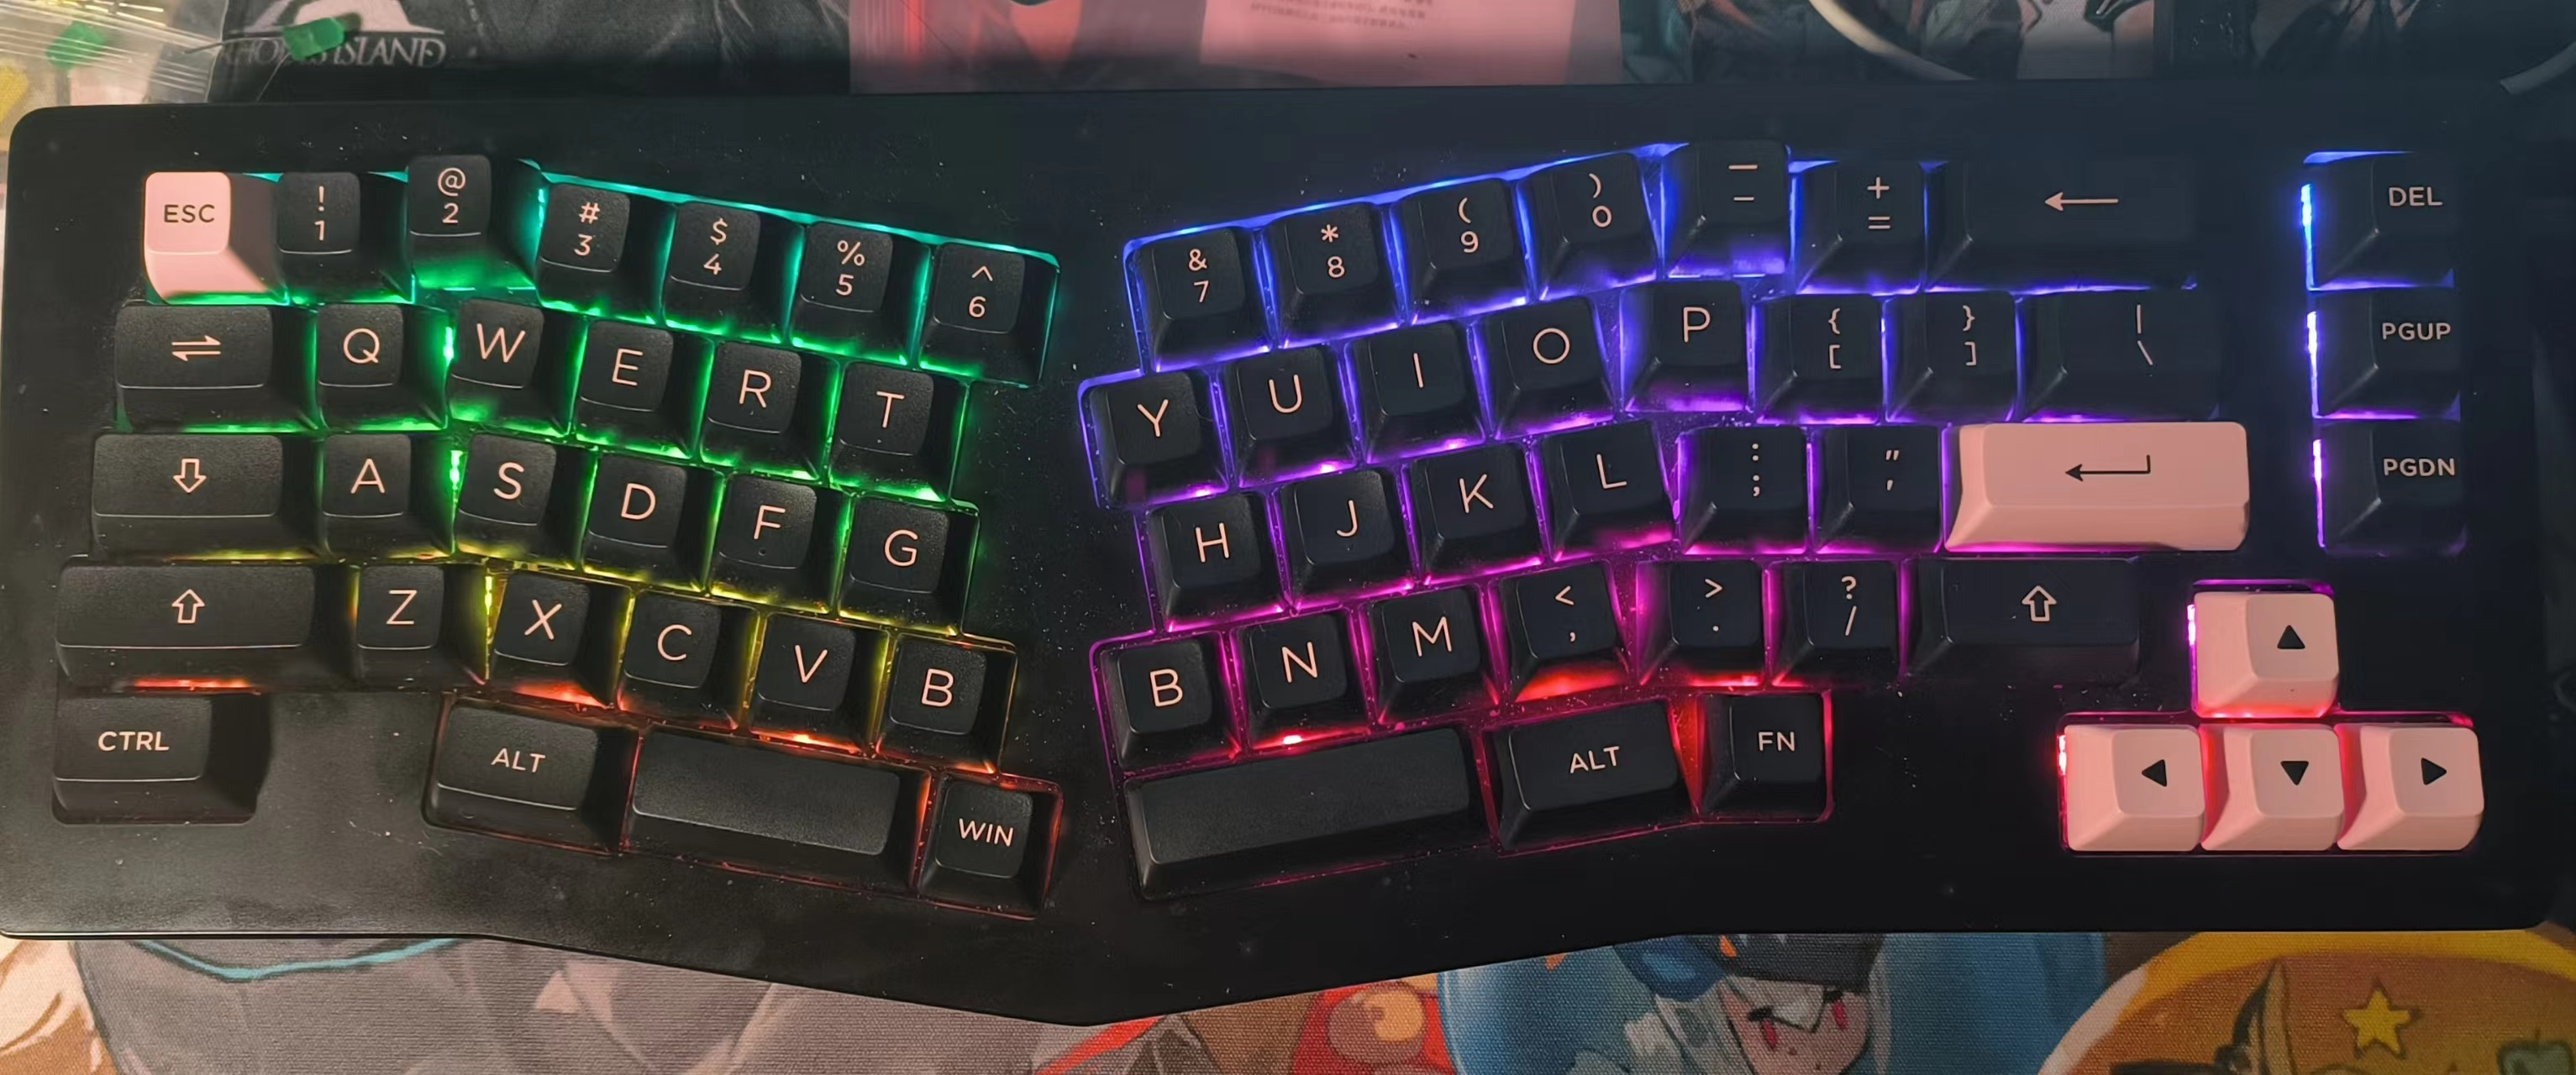 How do you know my keyboard is ACR Pro Alice Plus?